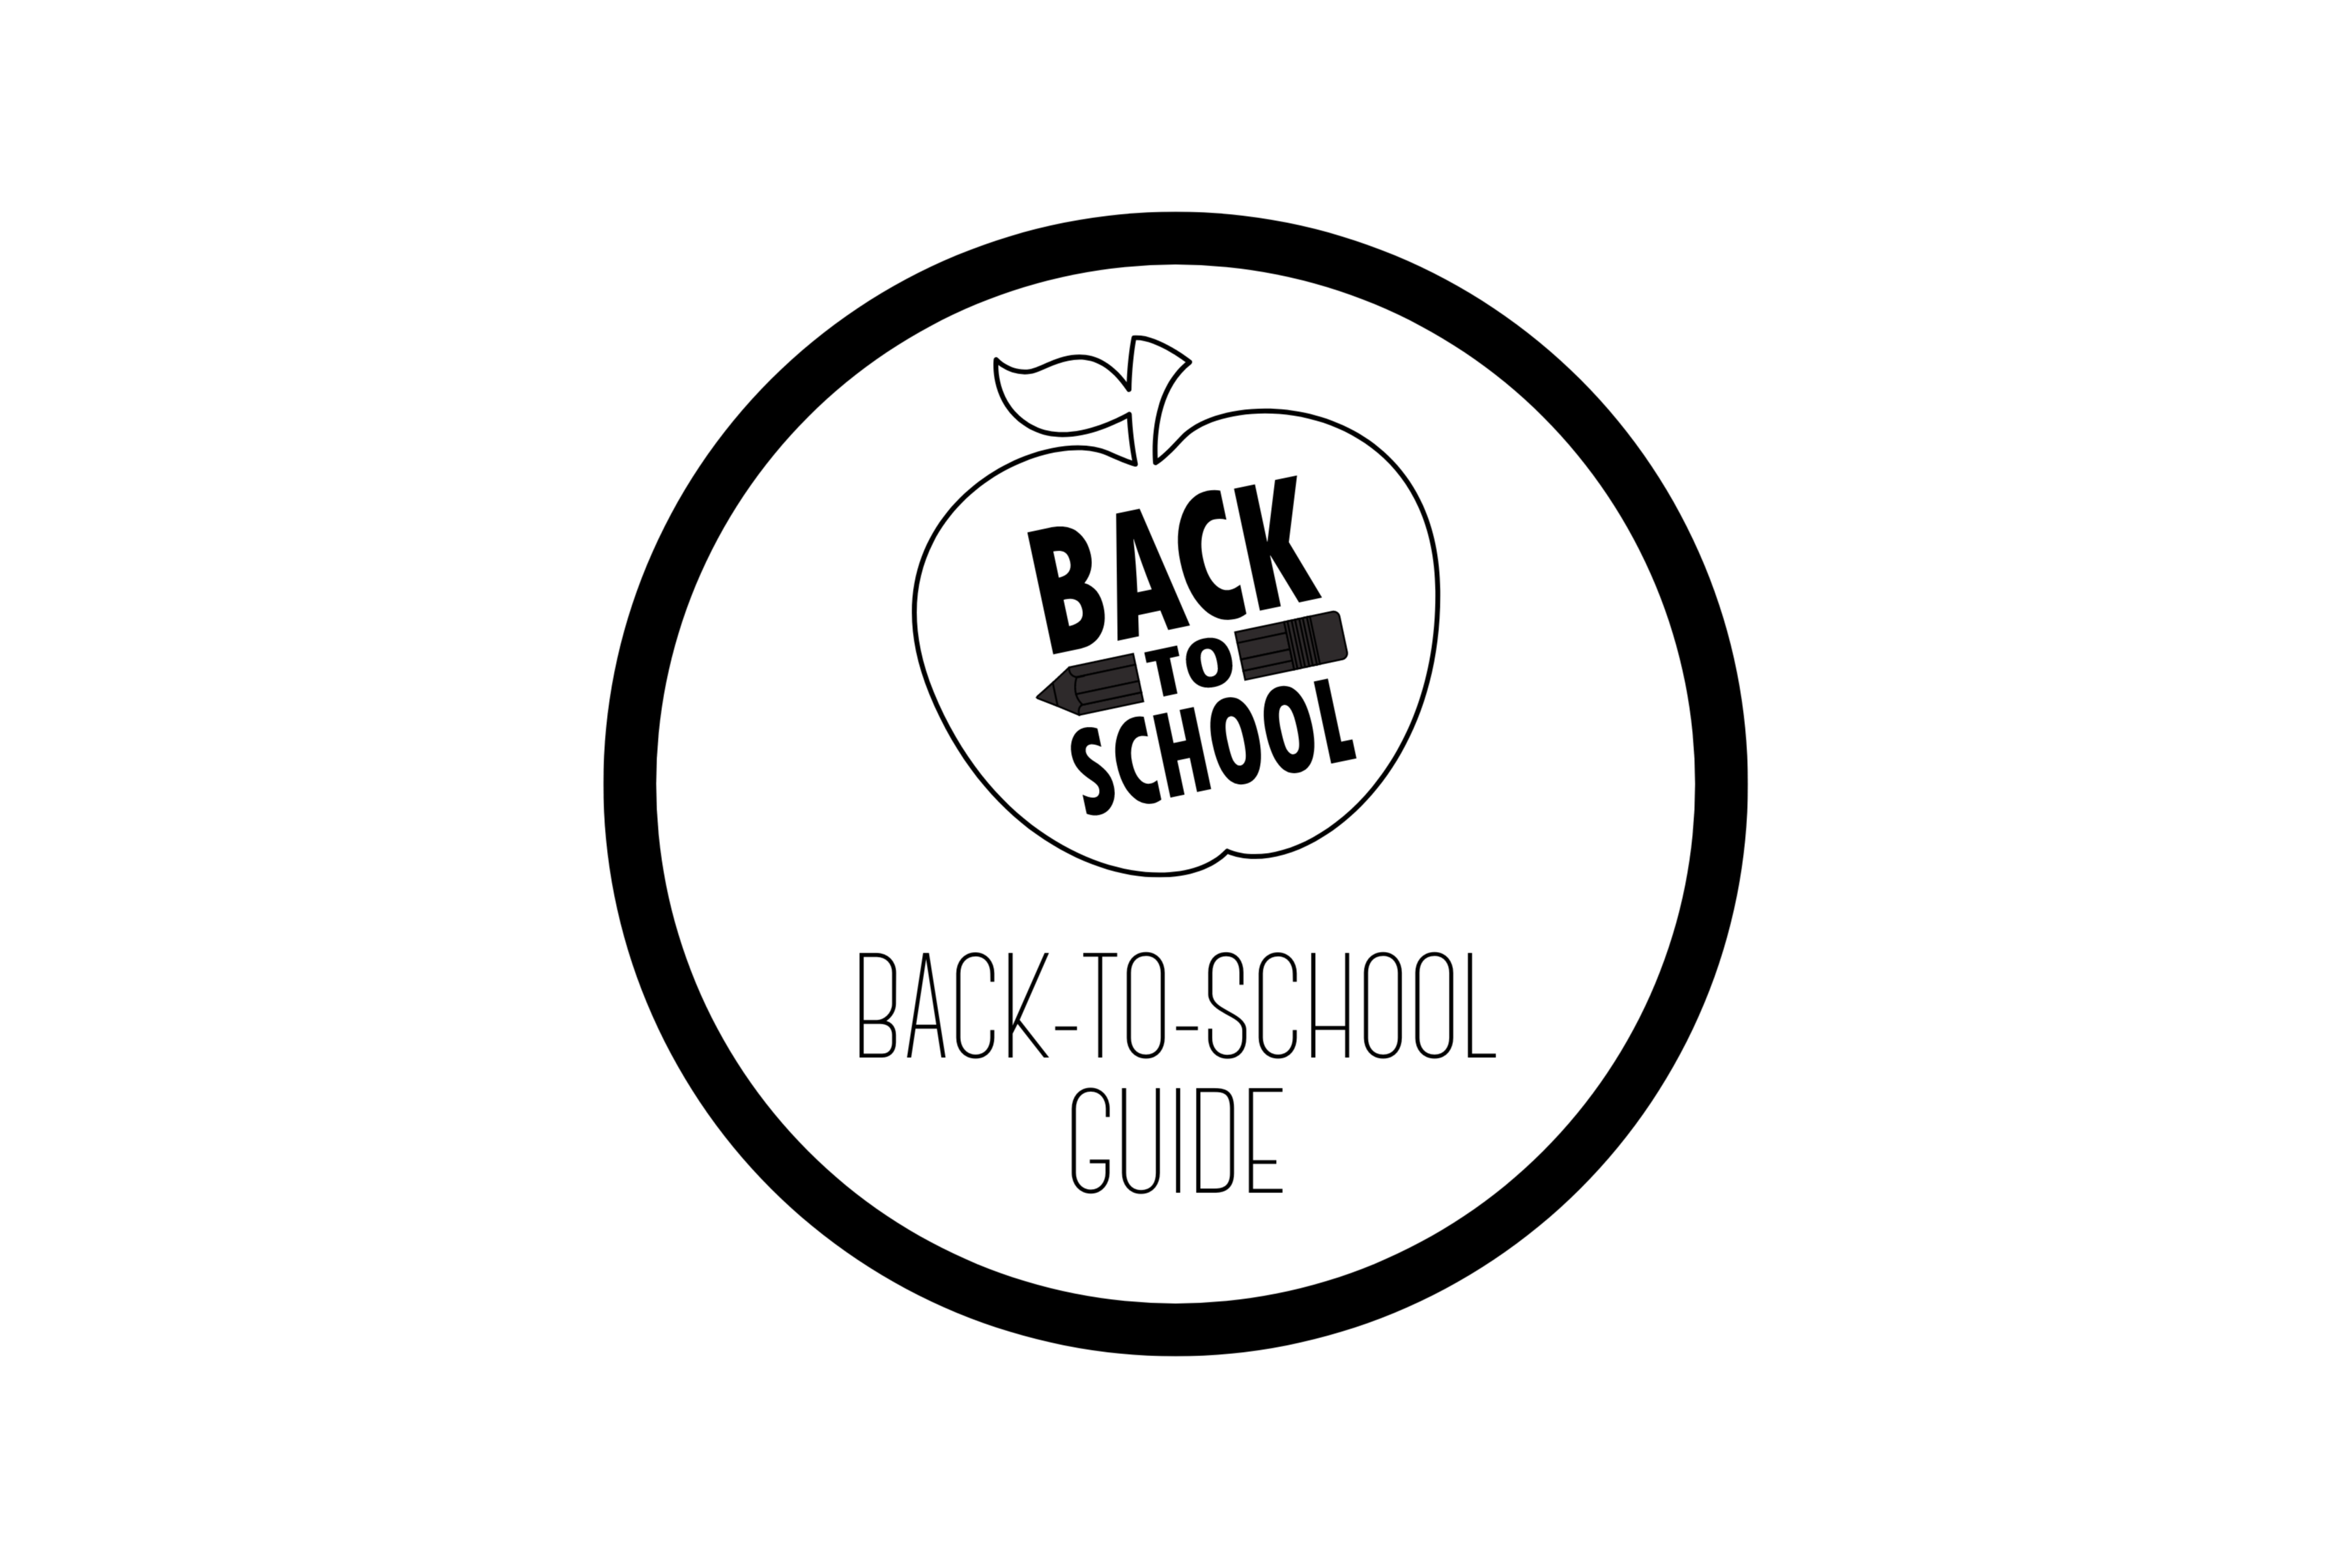 Back-to-School Guide